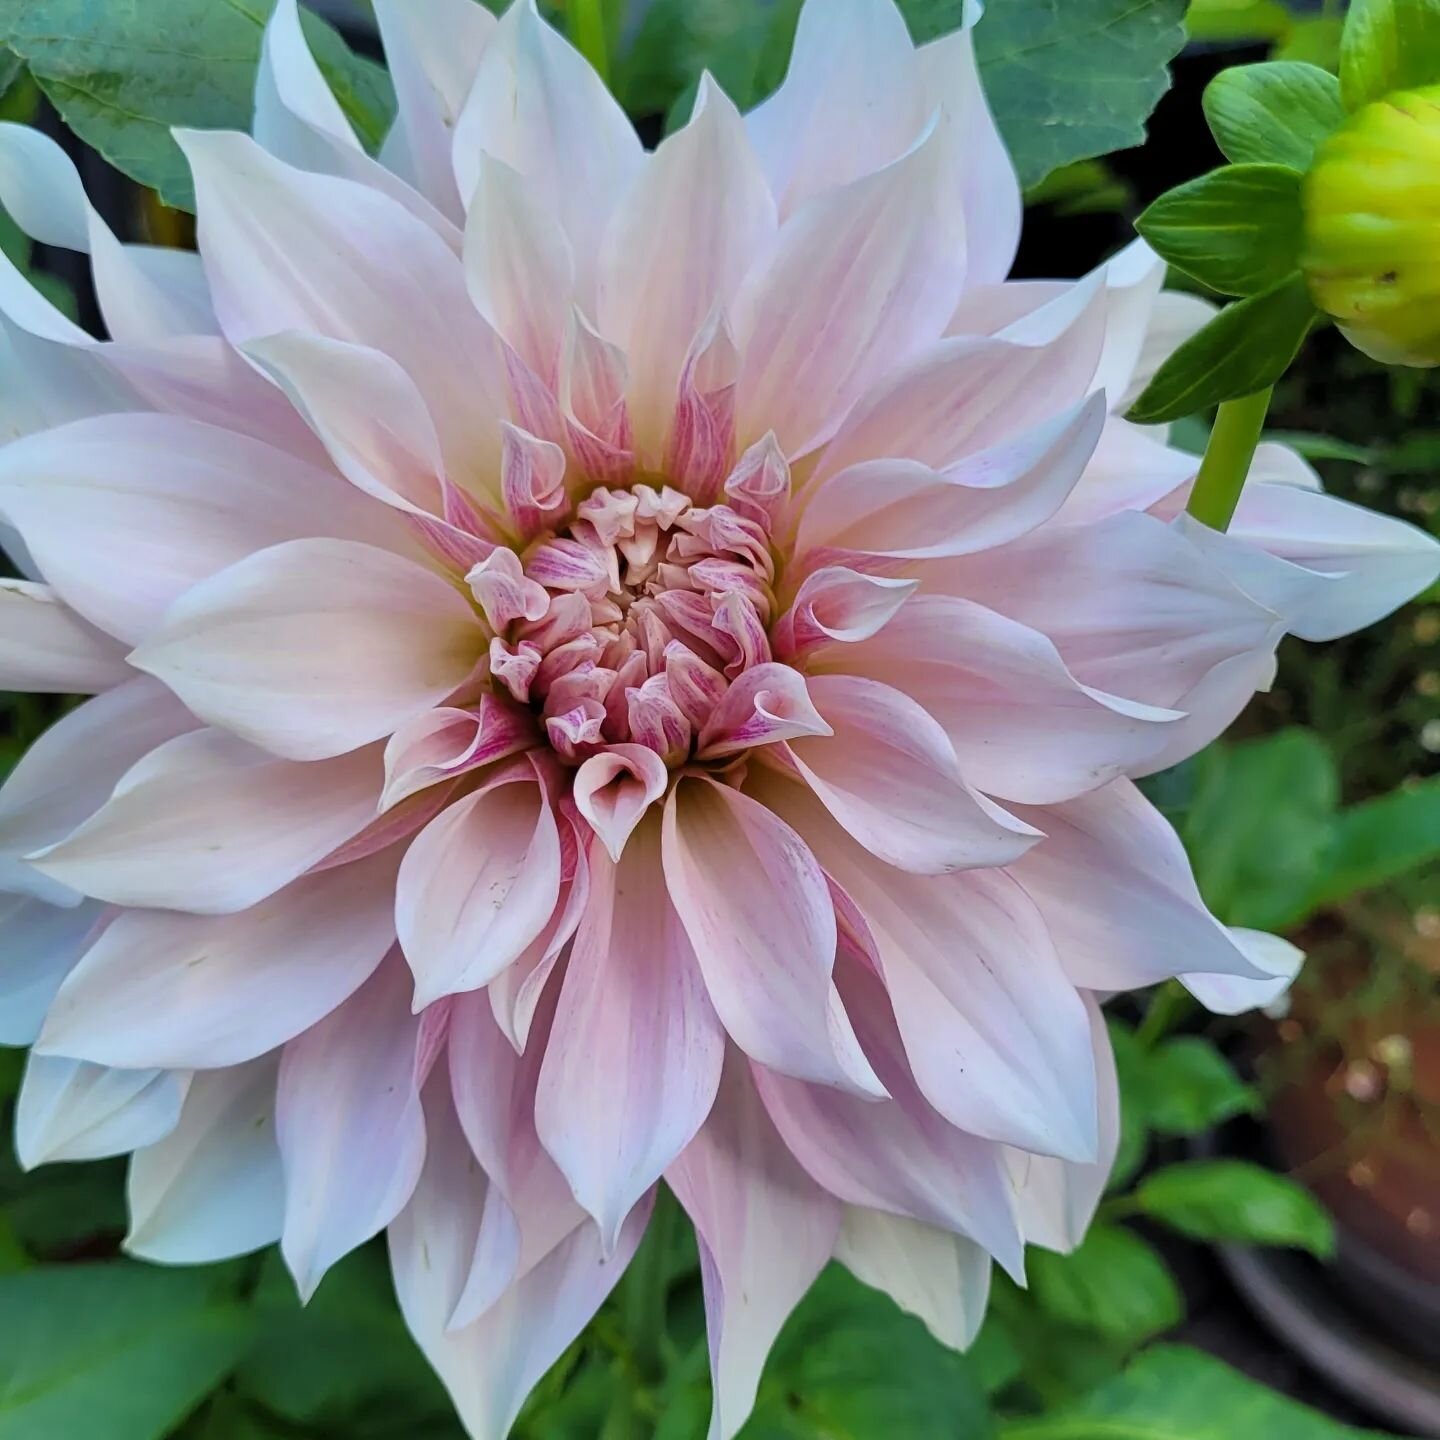 My Dahlia Cafe Au Lait is open! This is the third year I've had it. Previously it didn't start flowering until November, it was very frustrating starting to flower right at the end of the season so obviously the flowers didn&rsquo;t do much. This yea